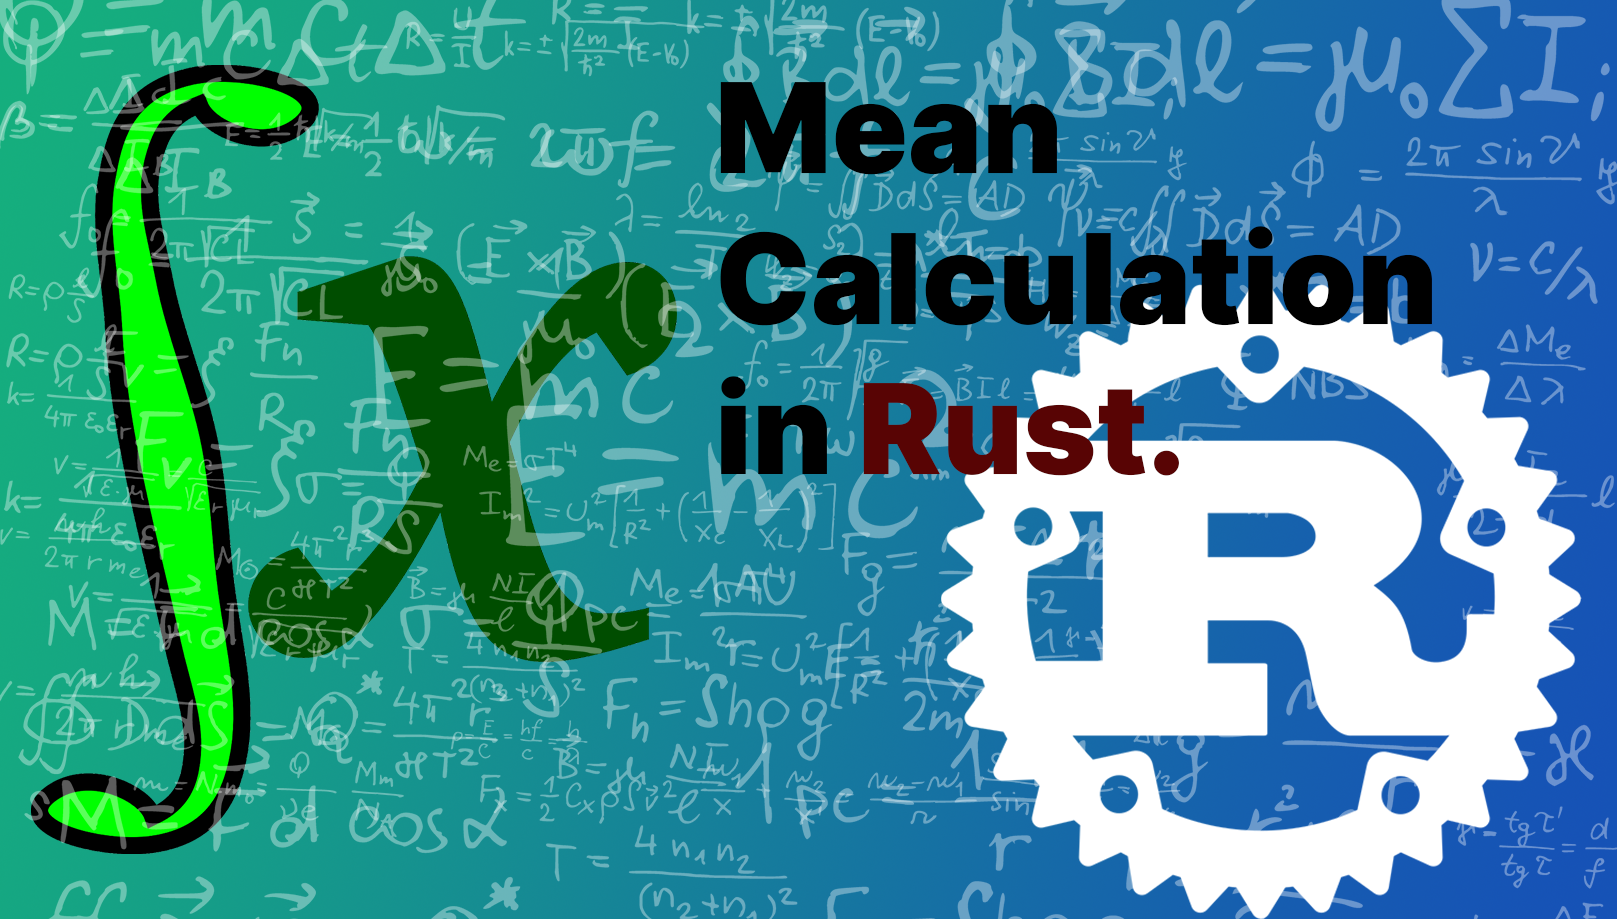 How To Calculate The Mean Of An Array In Rust